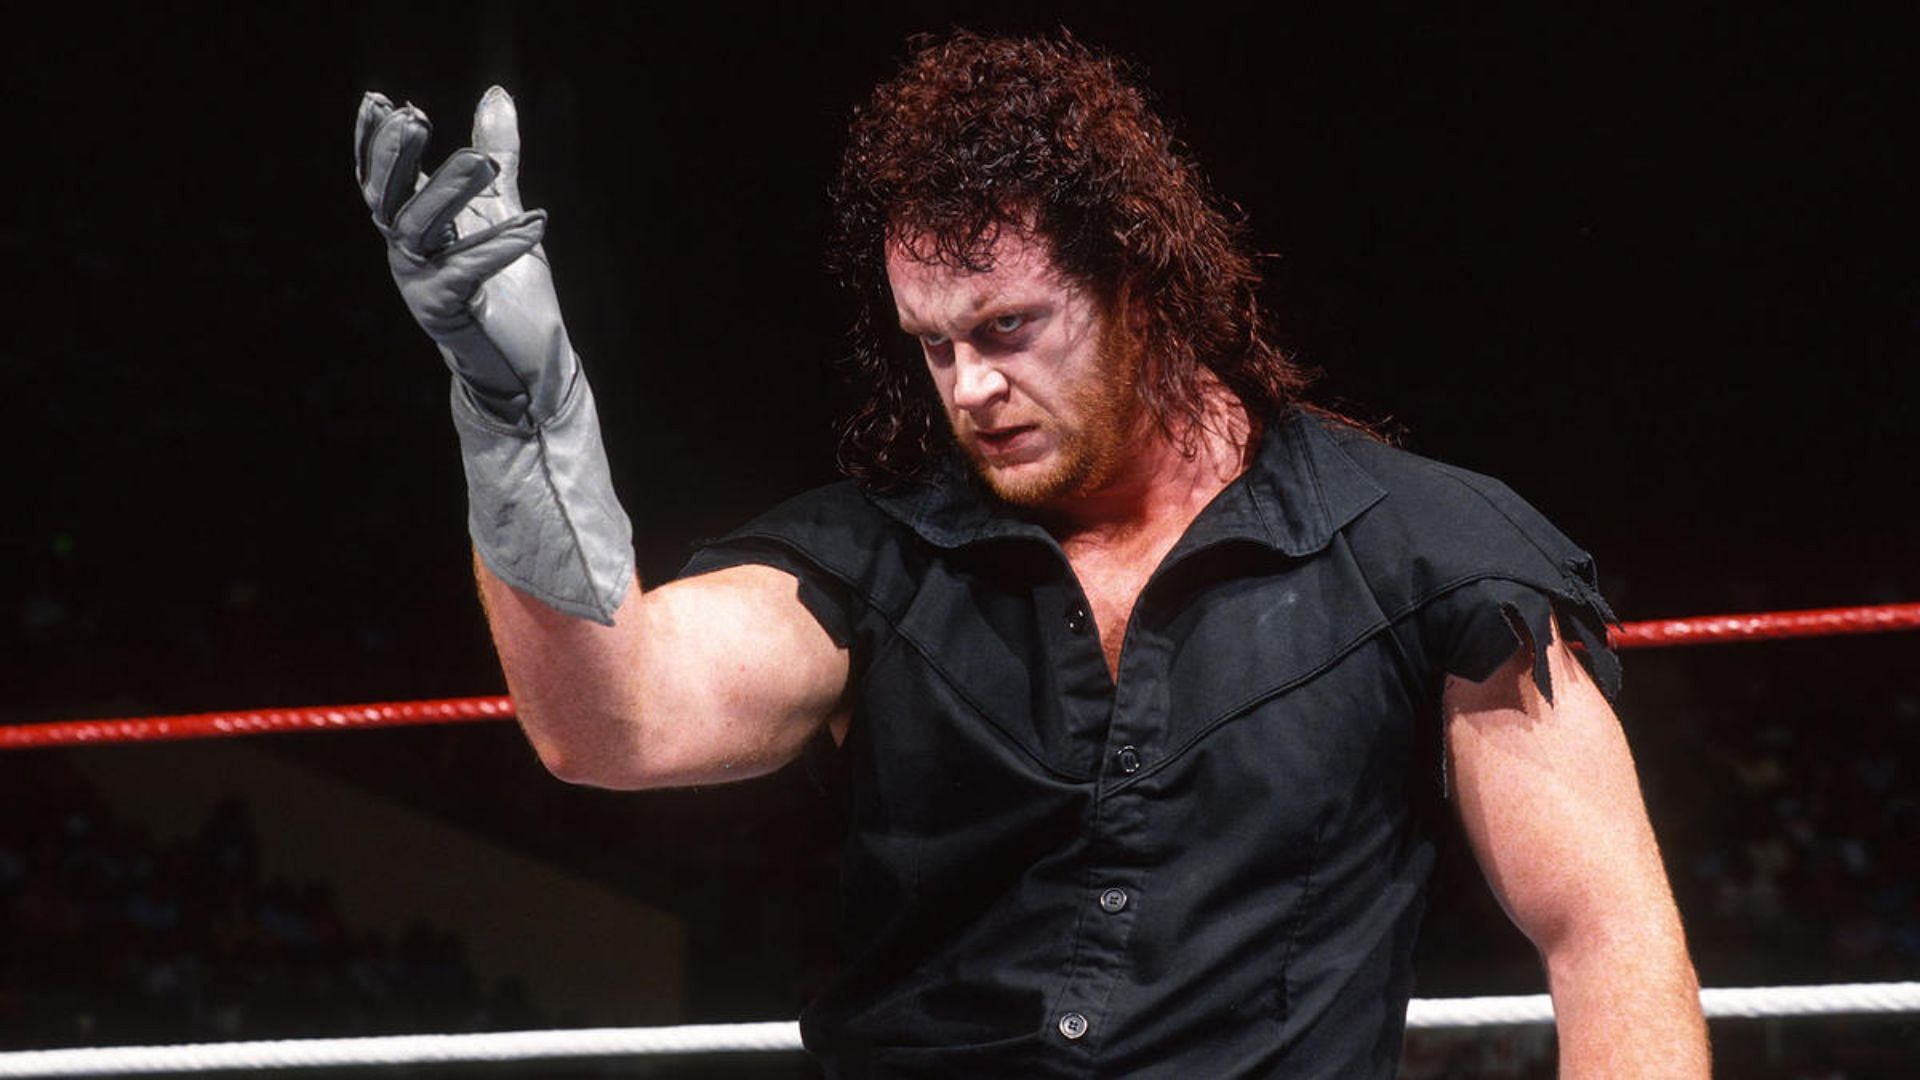 The Undertaker, real name Mark Calaway, joined WWE in 1990.